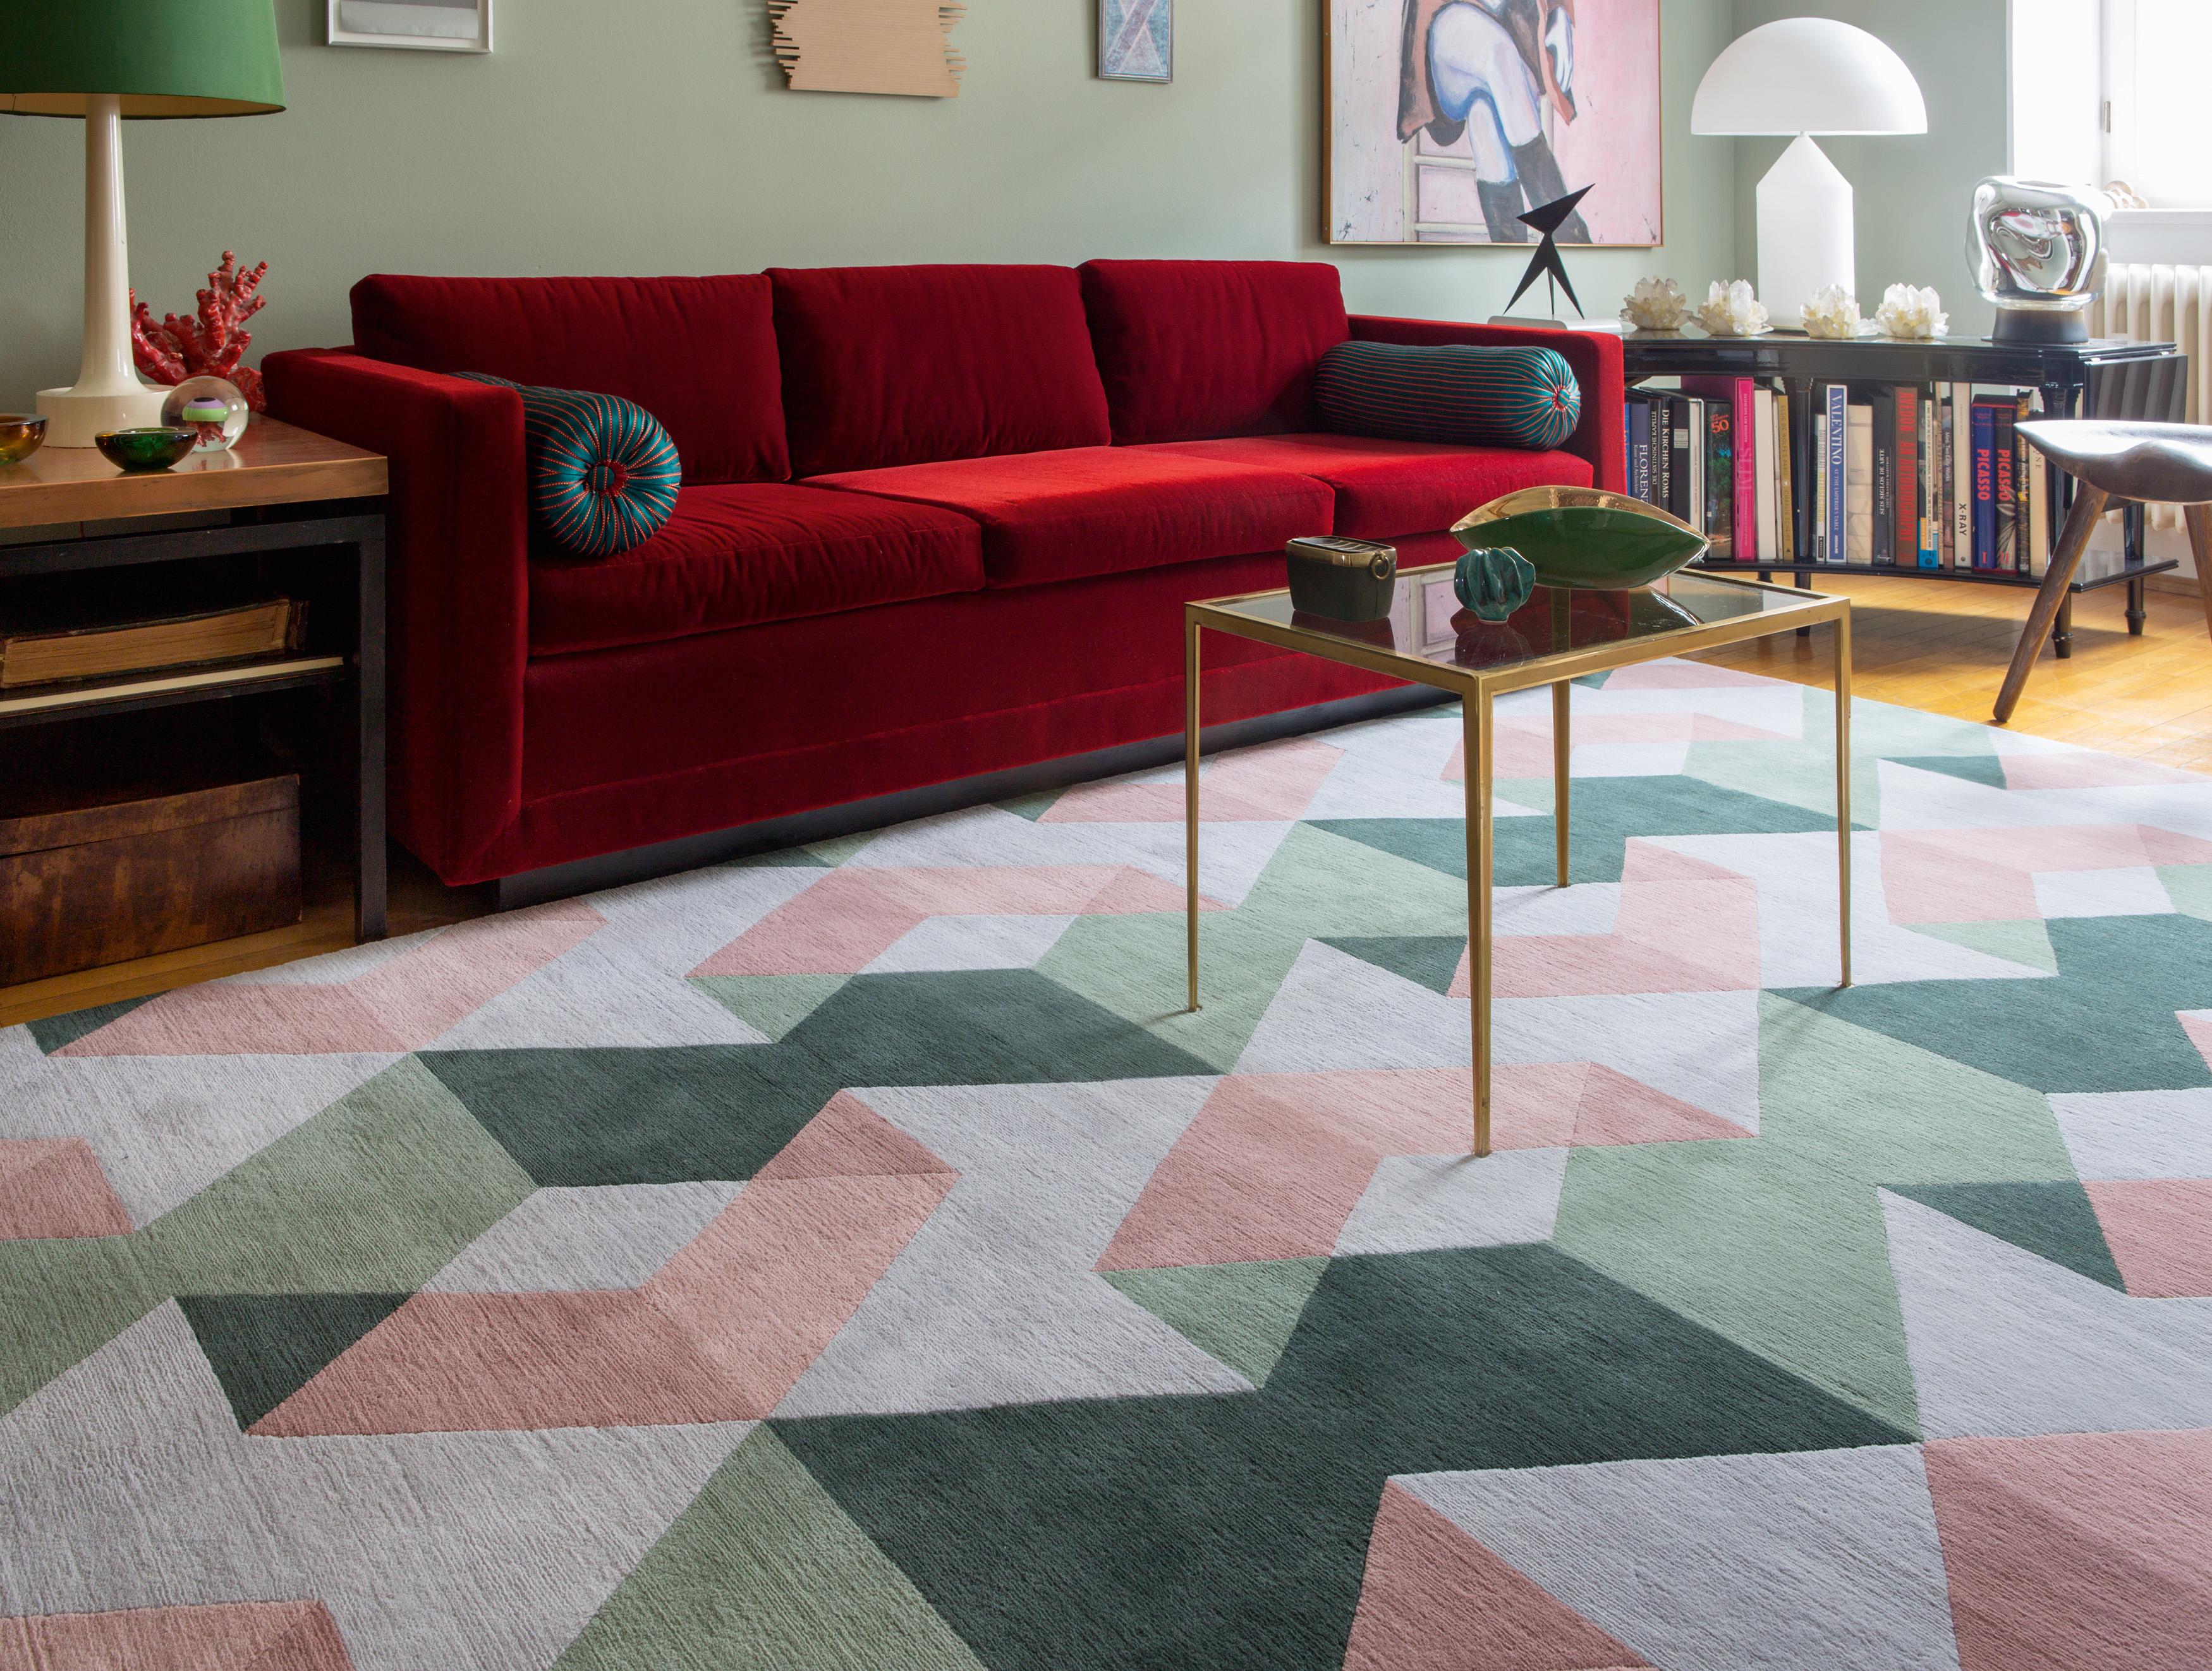 A new addition by our in-house studio, Fold is abstract in theme and handcrafted in Tibetan wool in a fresh palette of green, pink and neutral tones. Sold per square foot by the Rug Company and available in various sizes.

Craftsmanship: